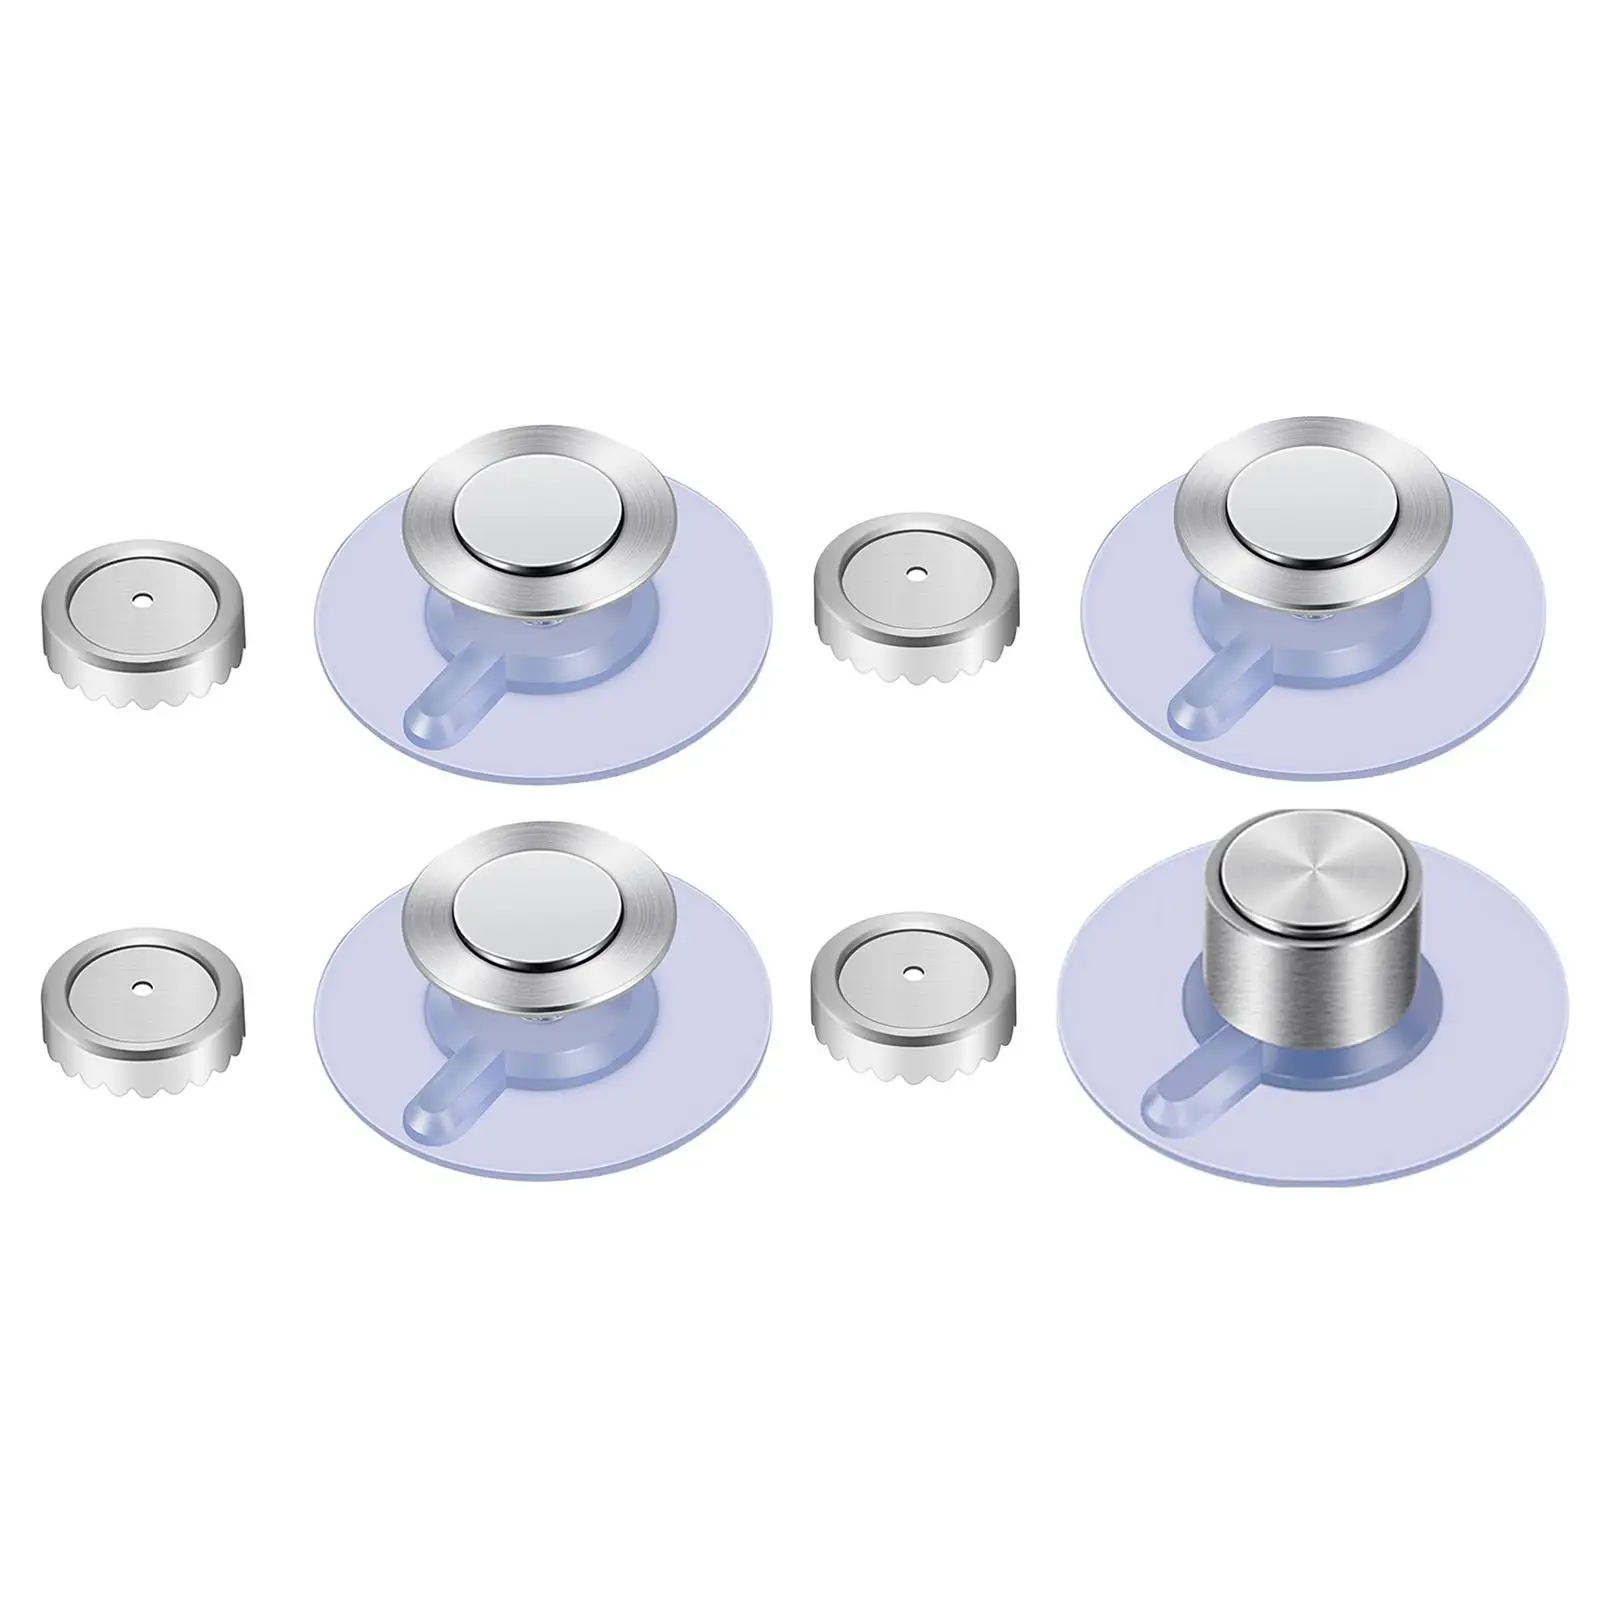 Holders Wall Mounted Punch Free Bracket Soap Hanger for Kitchen Bathroom Washroom Shower Wall